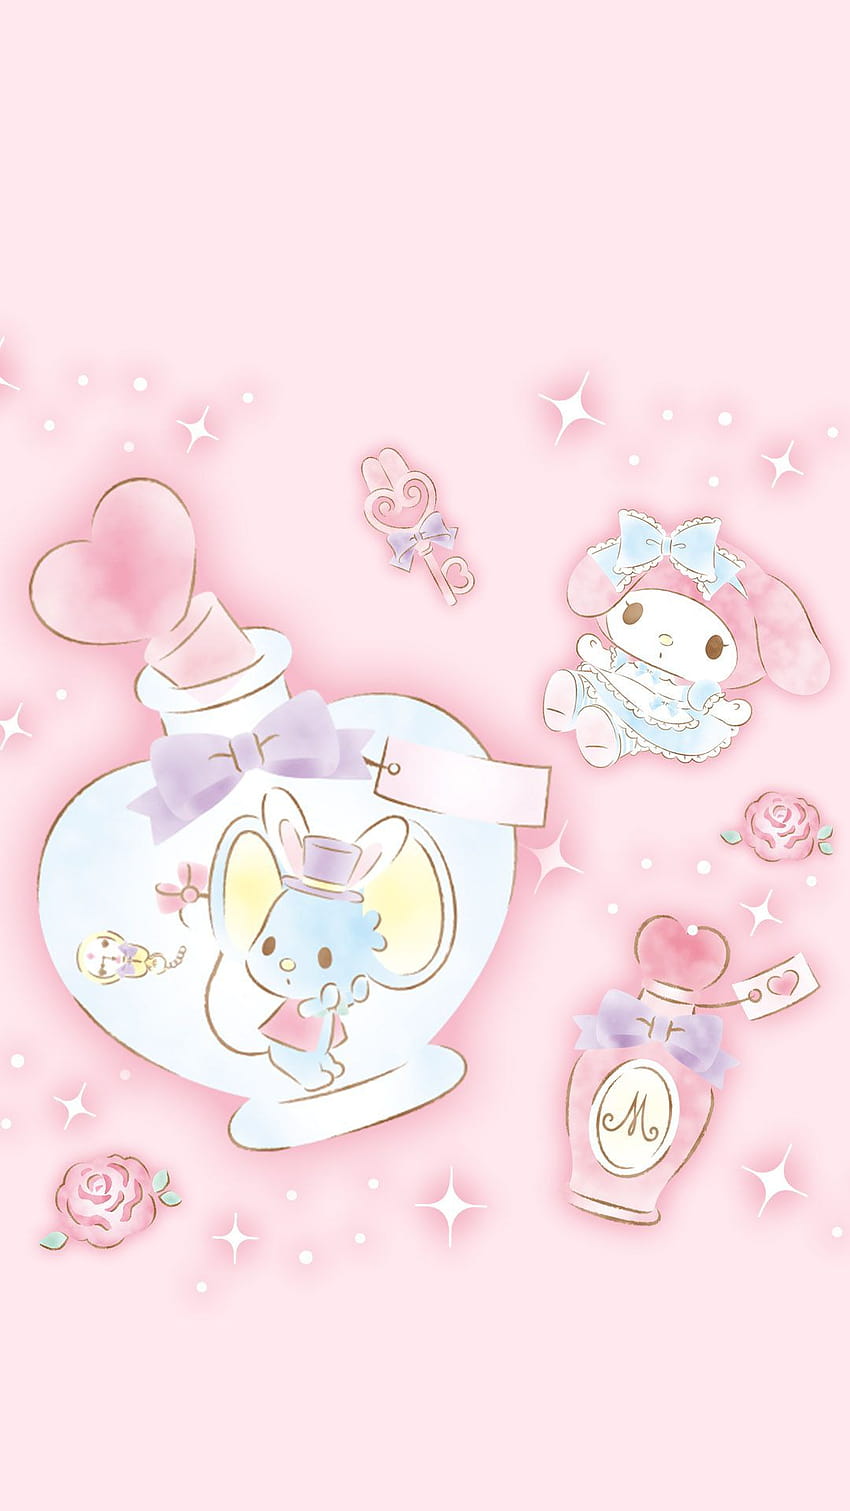 All Sanrio Characters, my melody valentines HD phone wallpaper